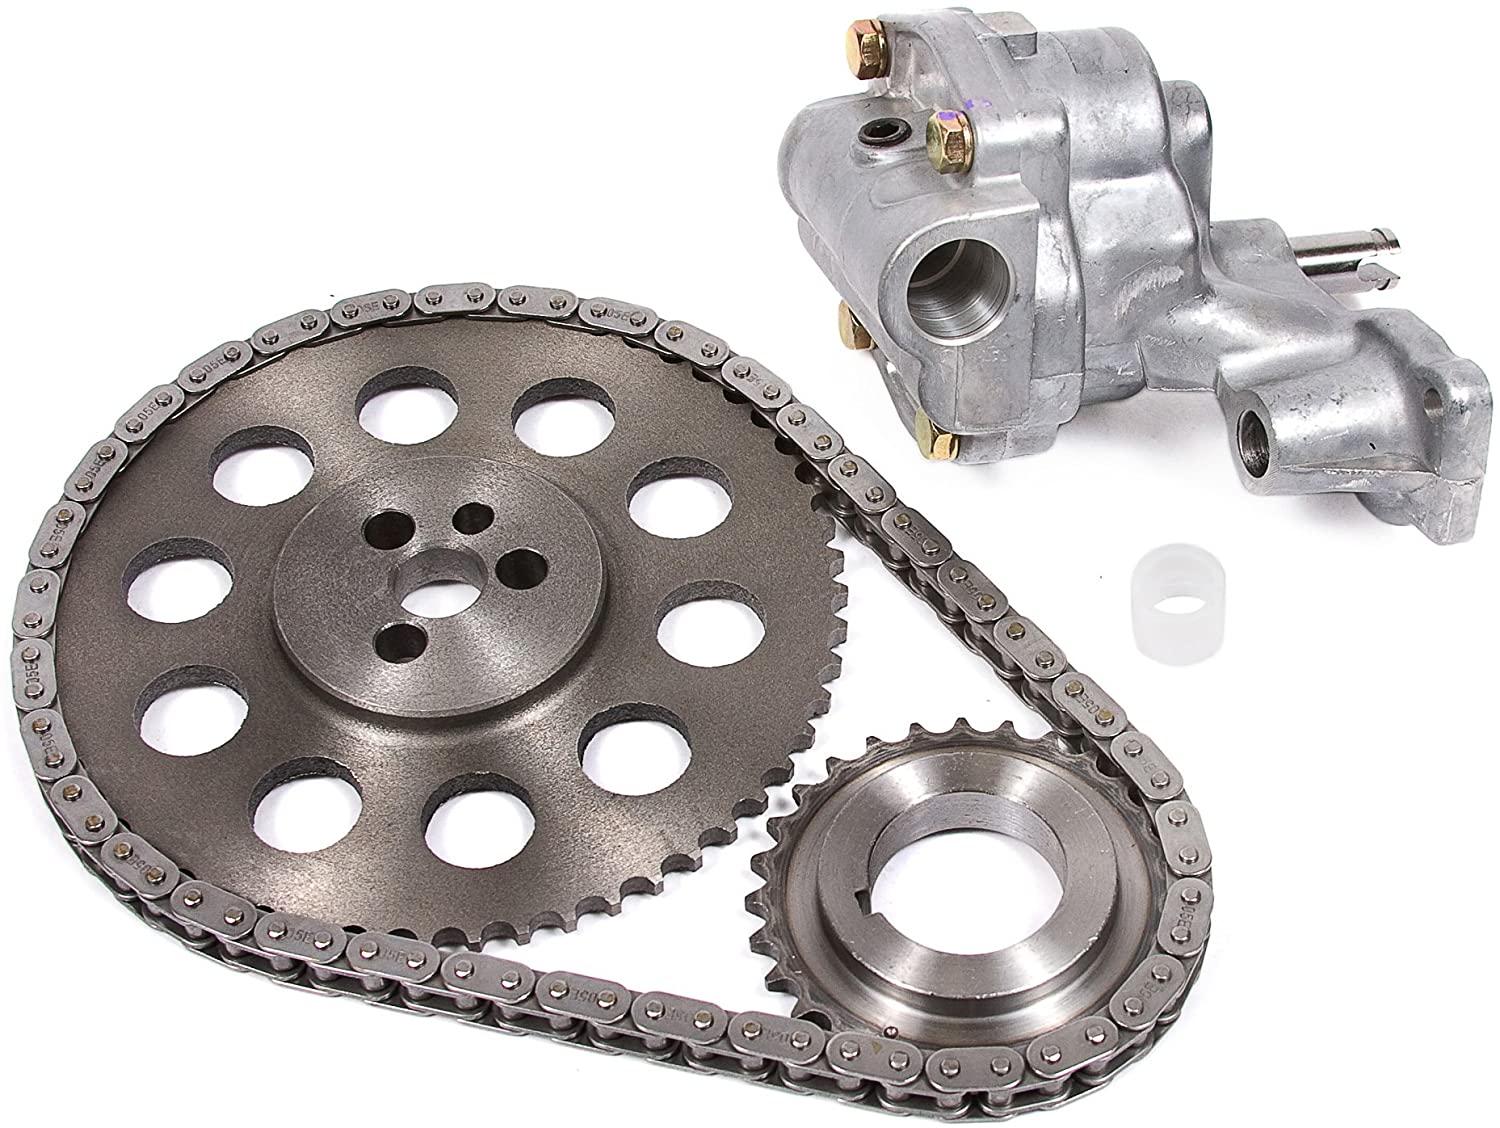 Evergreen TK10306LOP Compatible With 99-05 Chevrolet GMC V6 4.3 OHV Timing Chain Kit Oil Pump